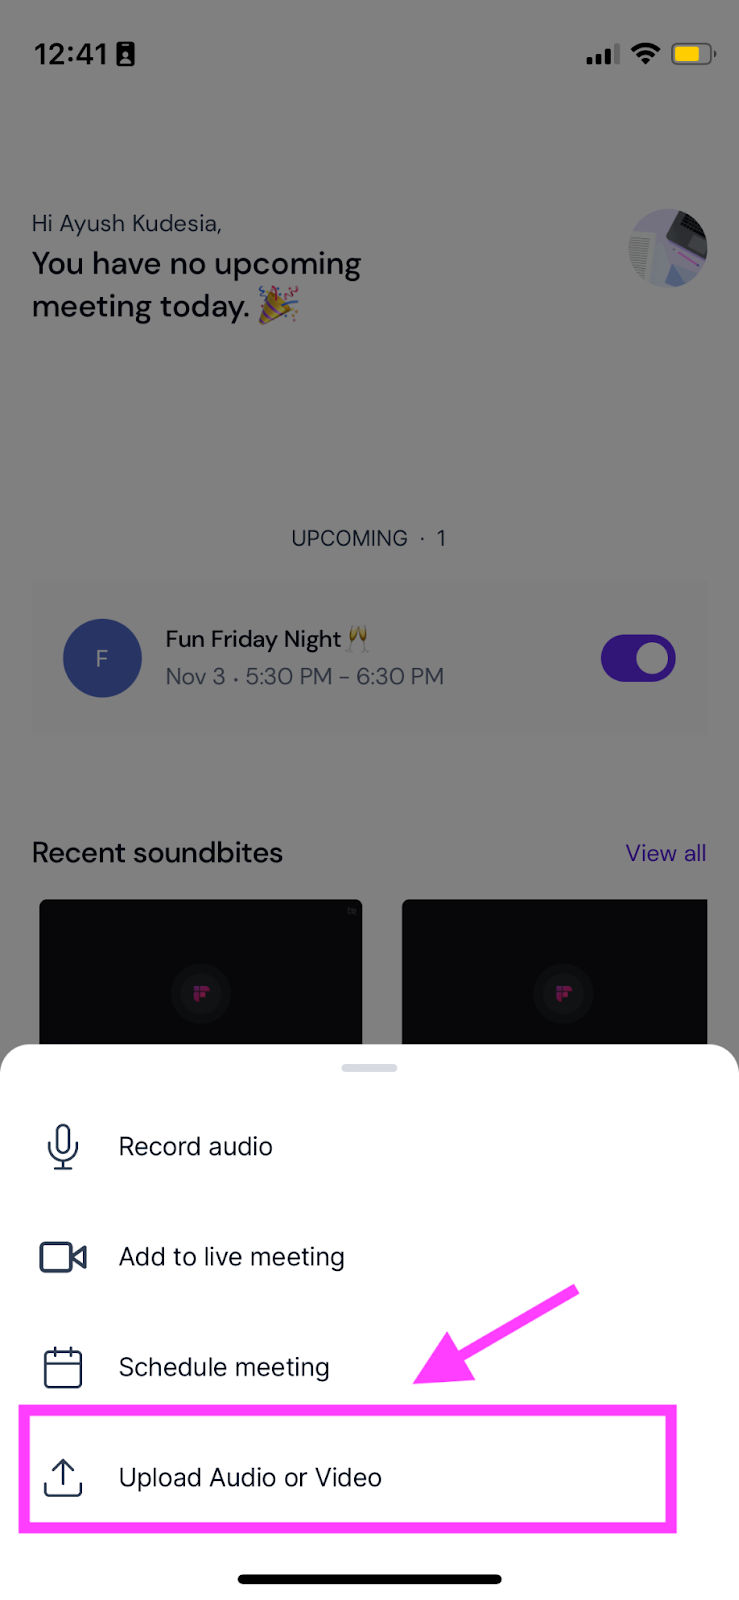 Select Upload Audio or Video